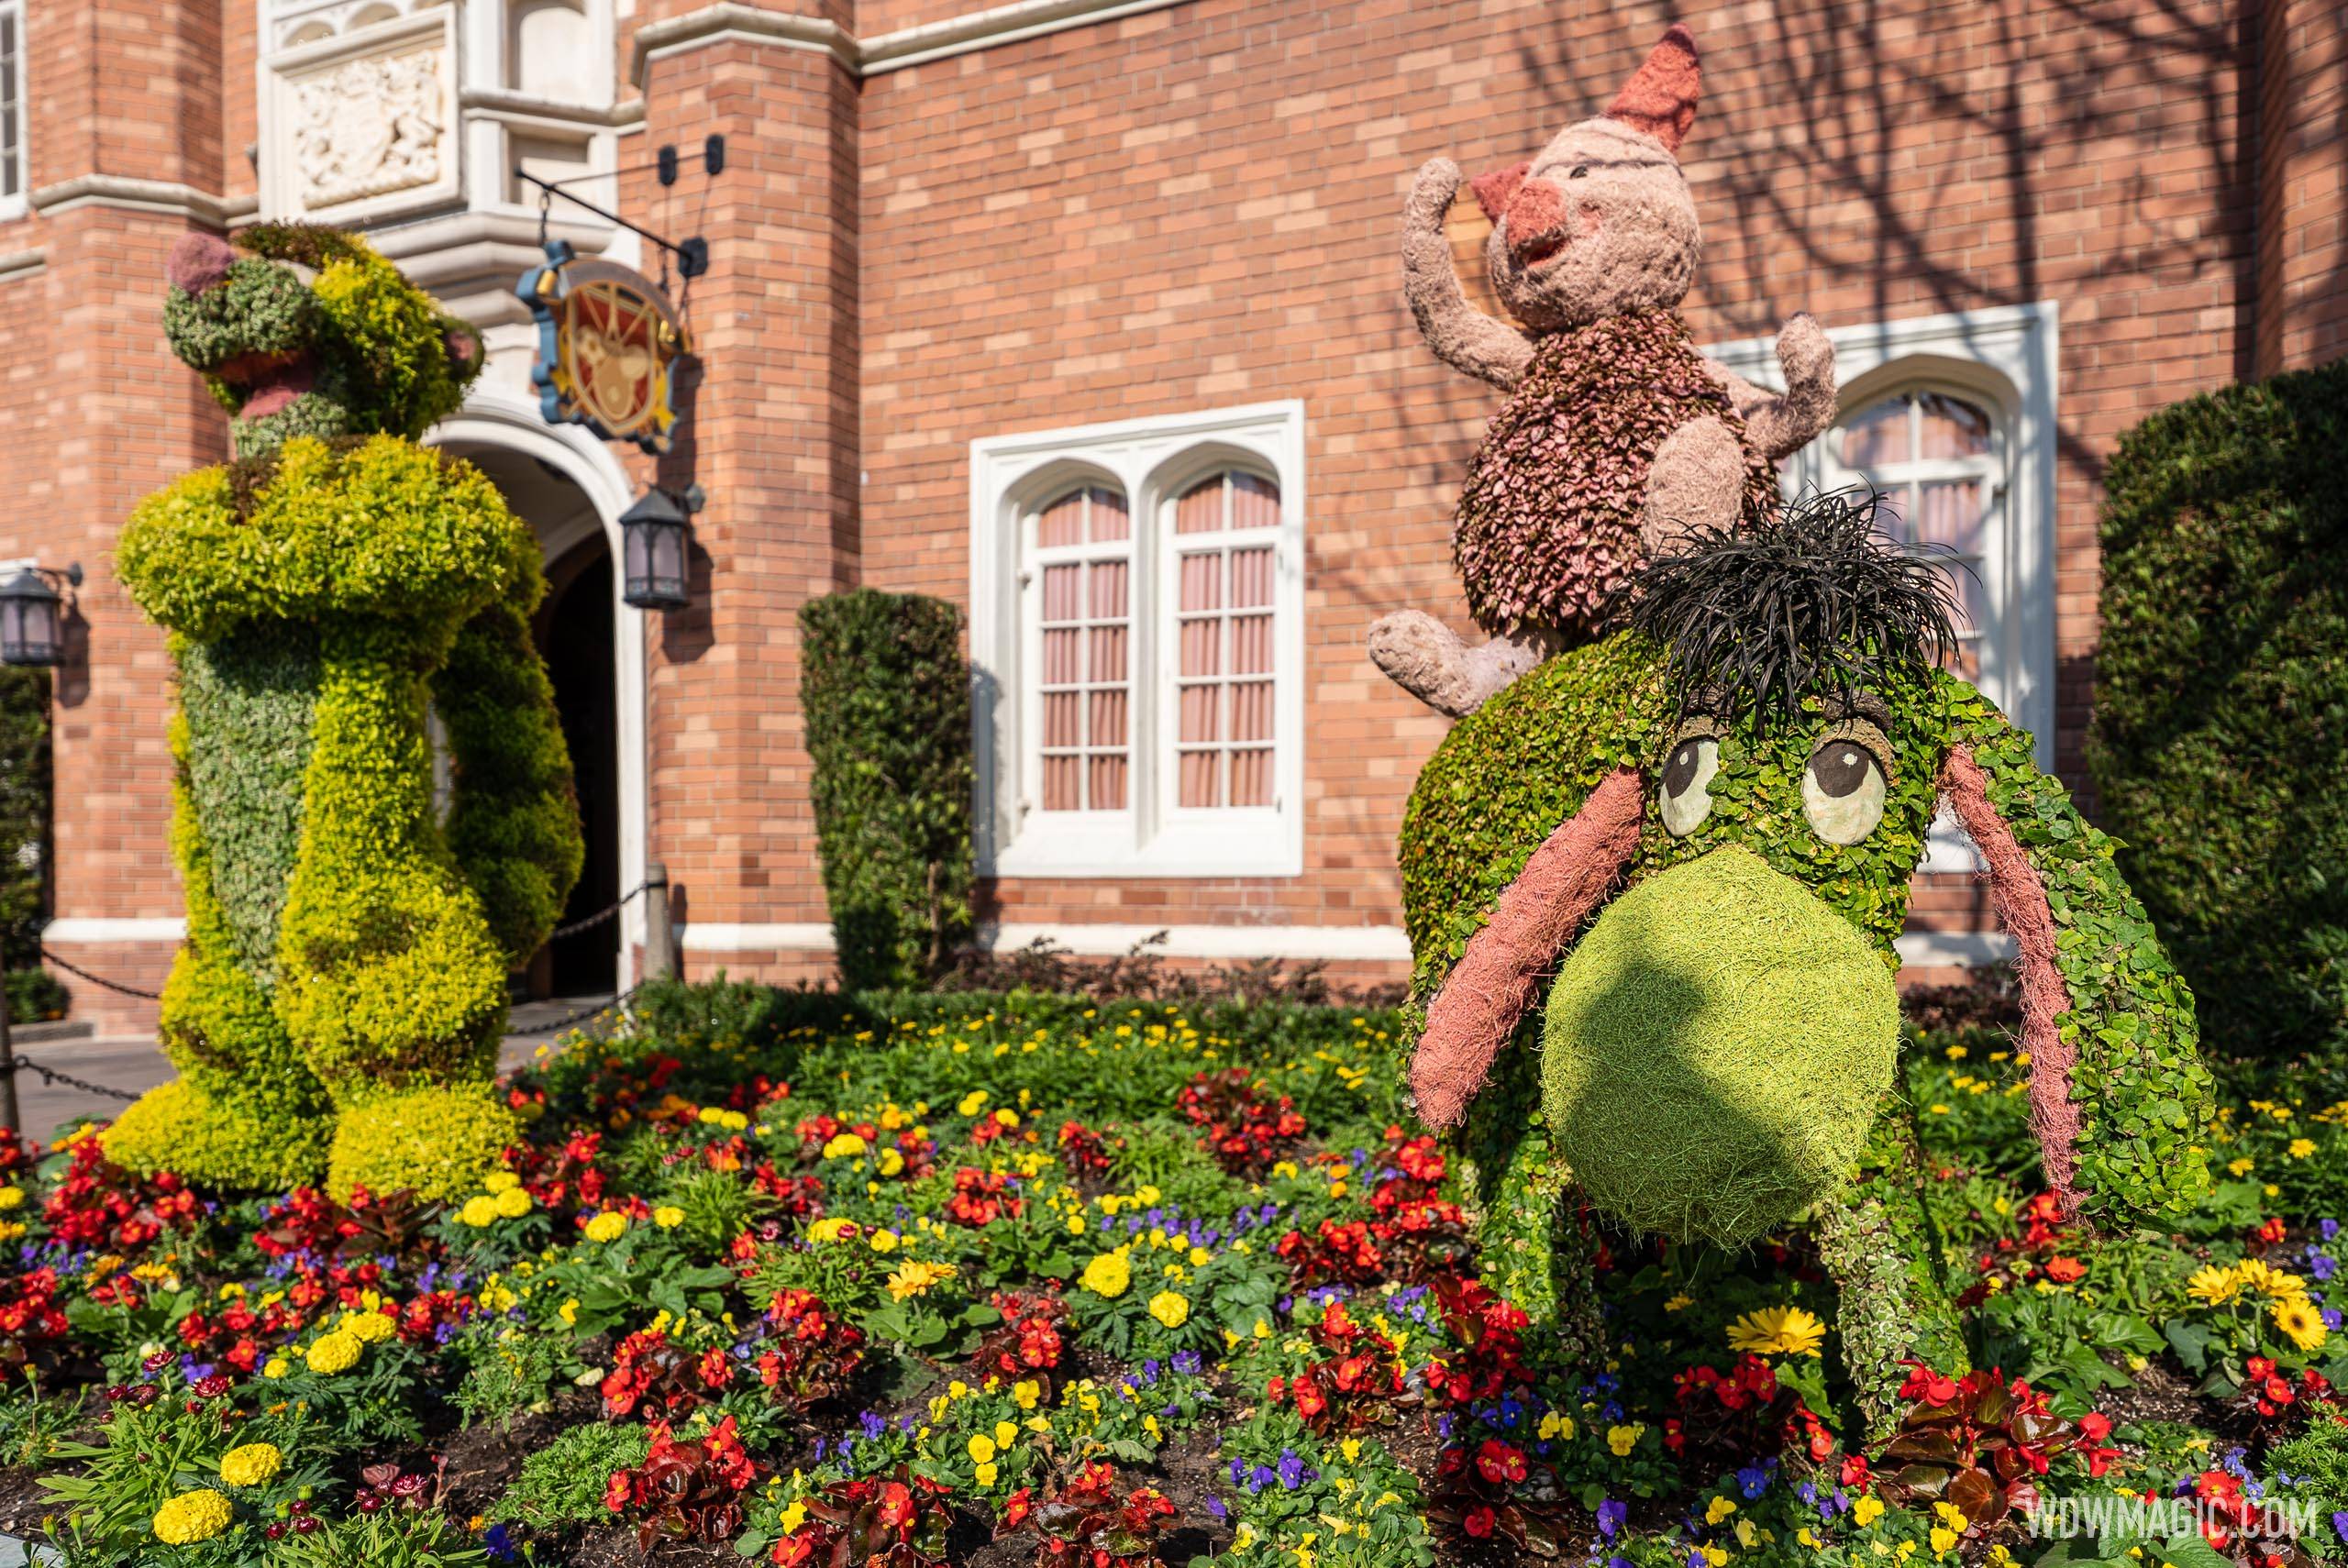 First topiaries arrive for the 2023 EPCOT International Flower and Garden Festival